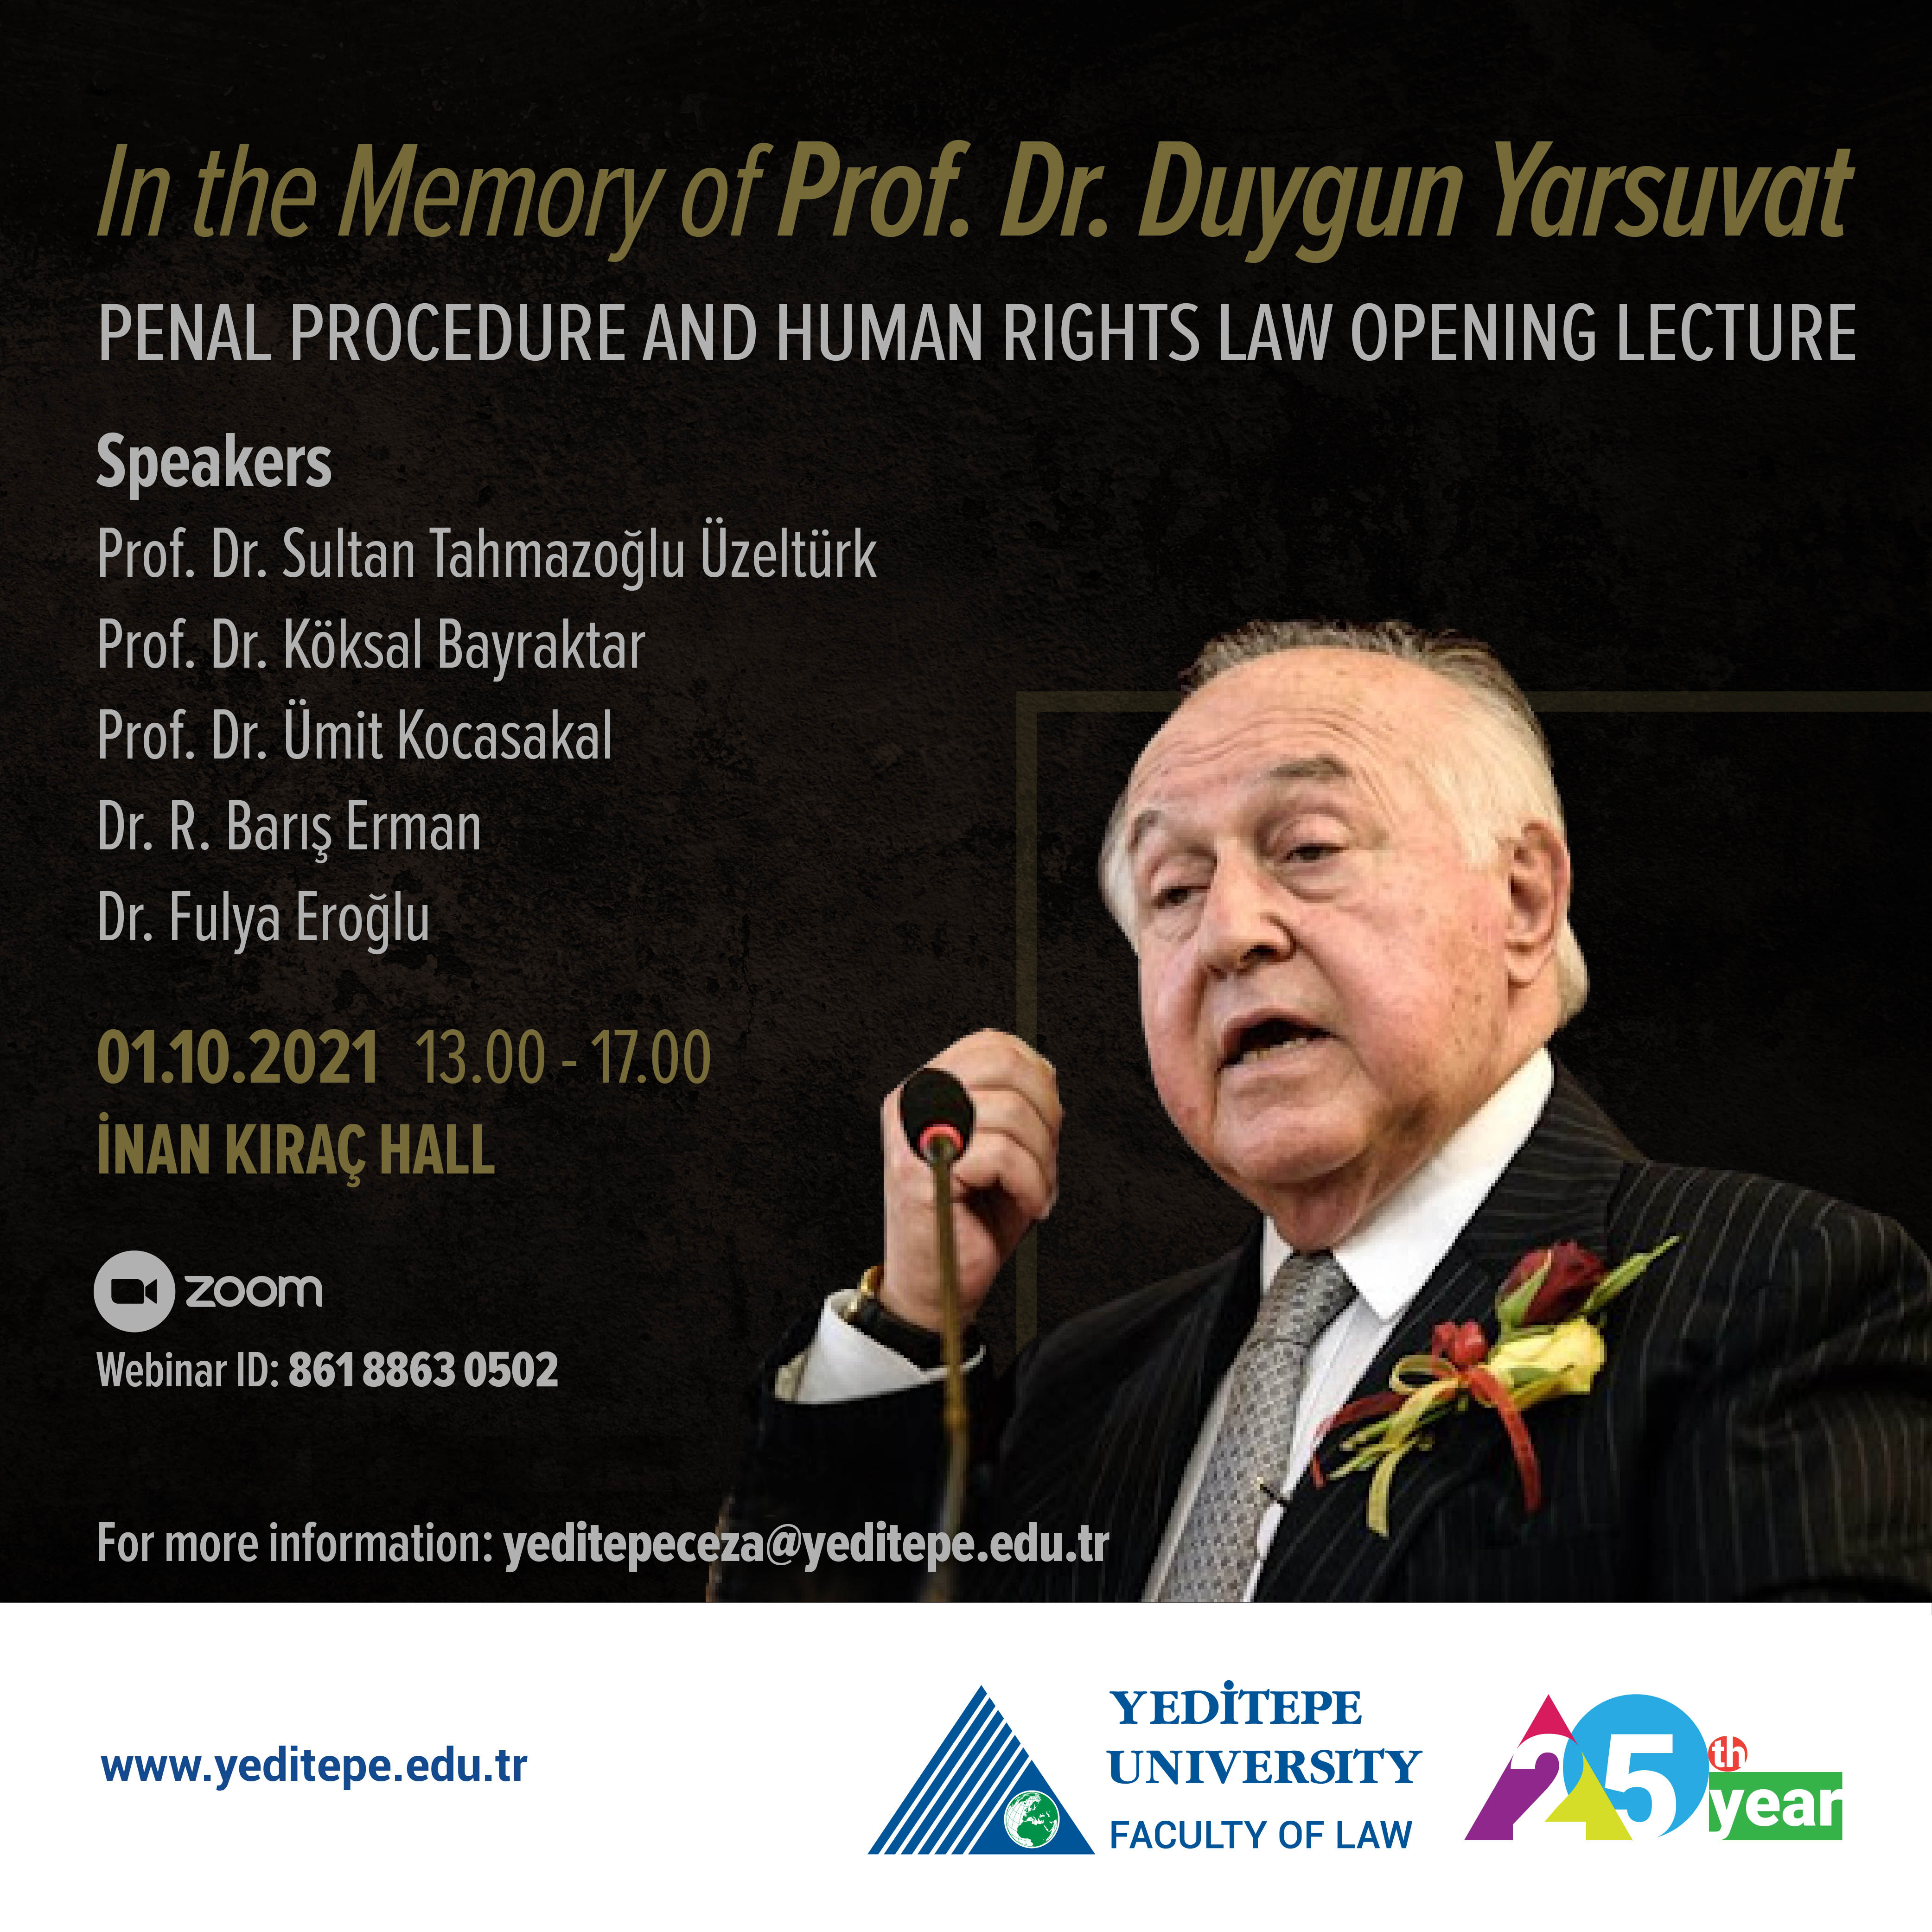 Penal Procedure and Human Rights Law Opening Lecture